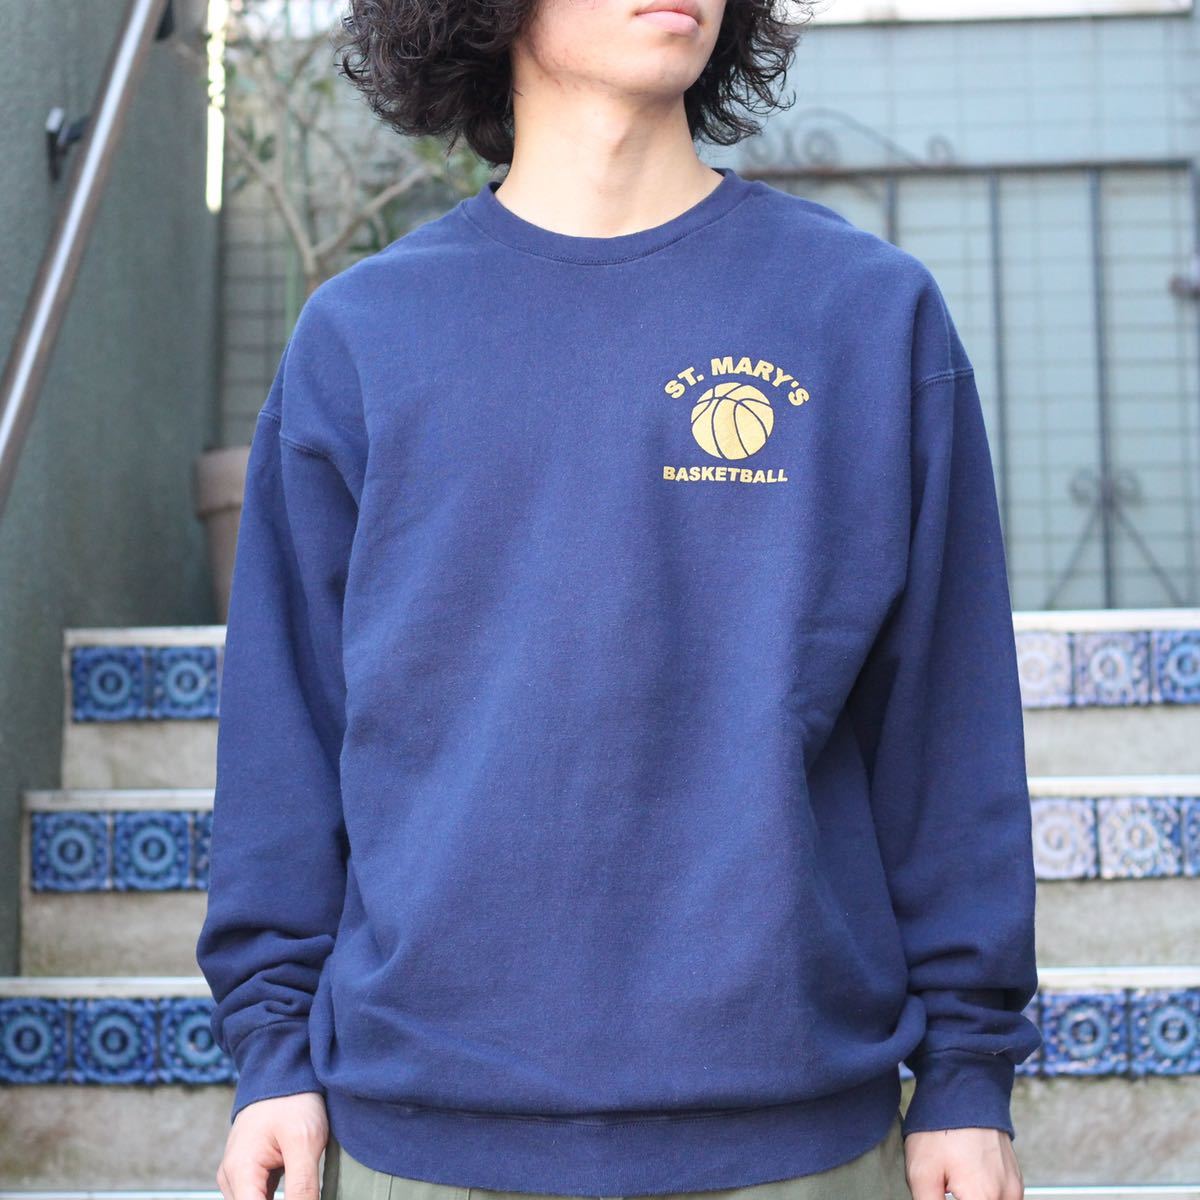 USA VINTAGE COLLAGE DESIGN OVER SWEAT SHIRT/アメリカ古着カレッジデザインオーバースウェット